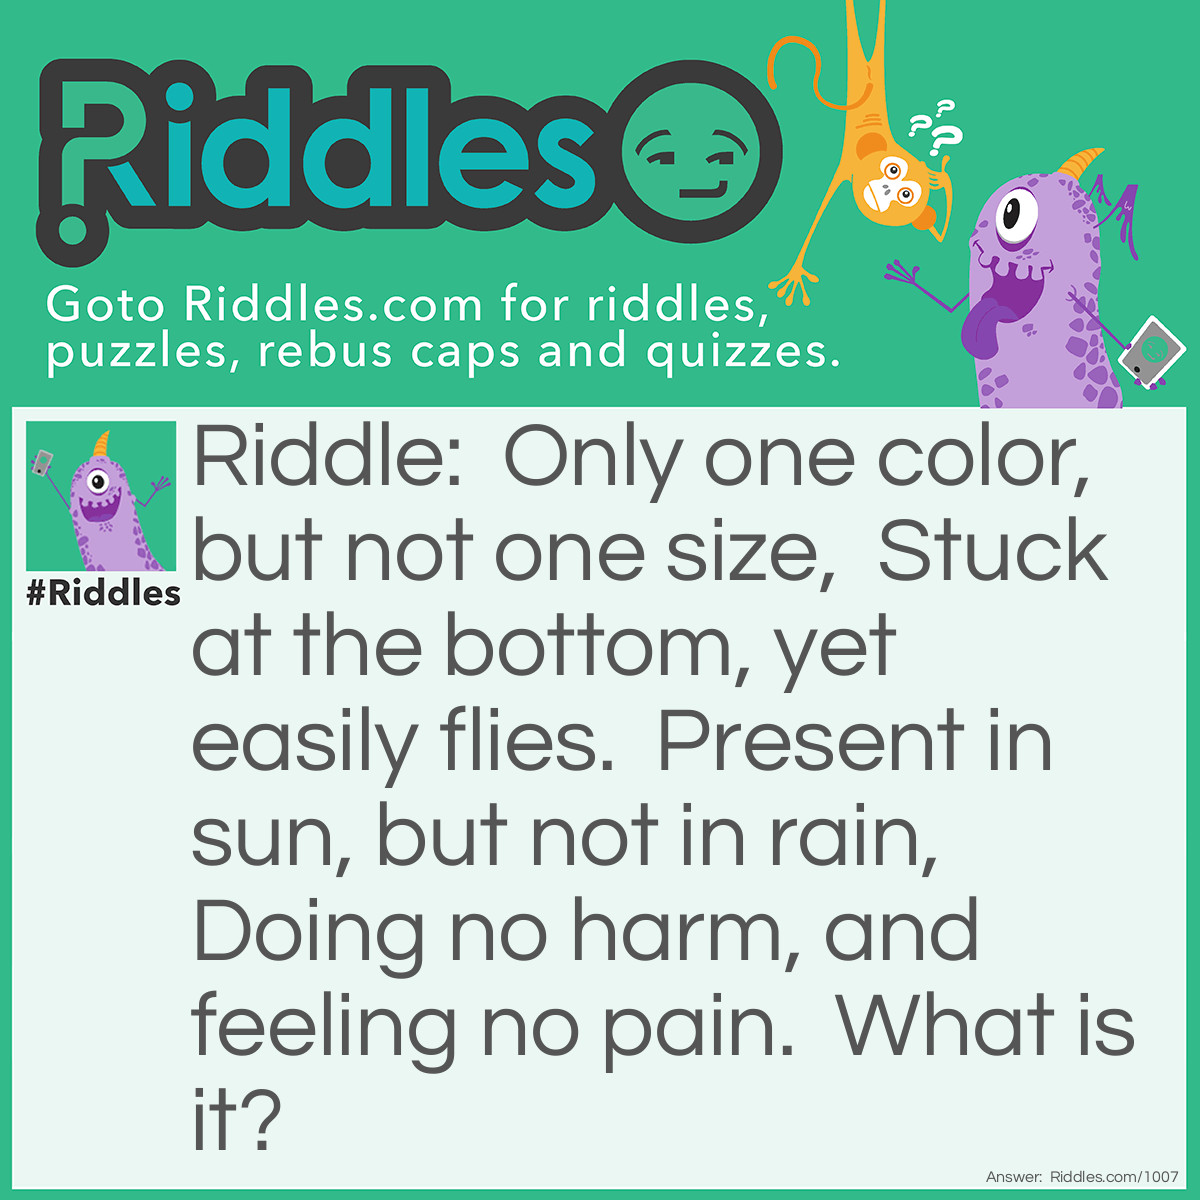 Riddle: Only one color, but not one size,  Stuck at the bottom, yet easily flies.  Present in sun, but not in rain,  Doing no harm, and feeling no pain.  What is it? Answer: It's a shadow!